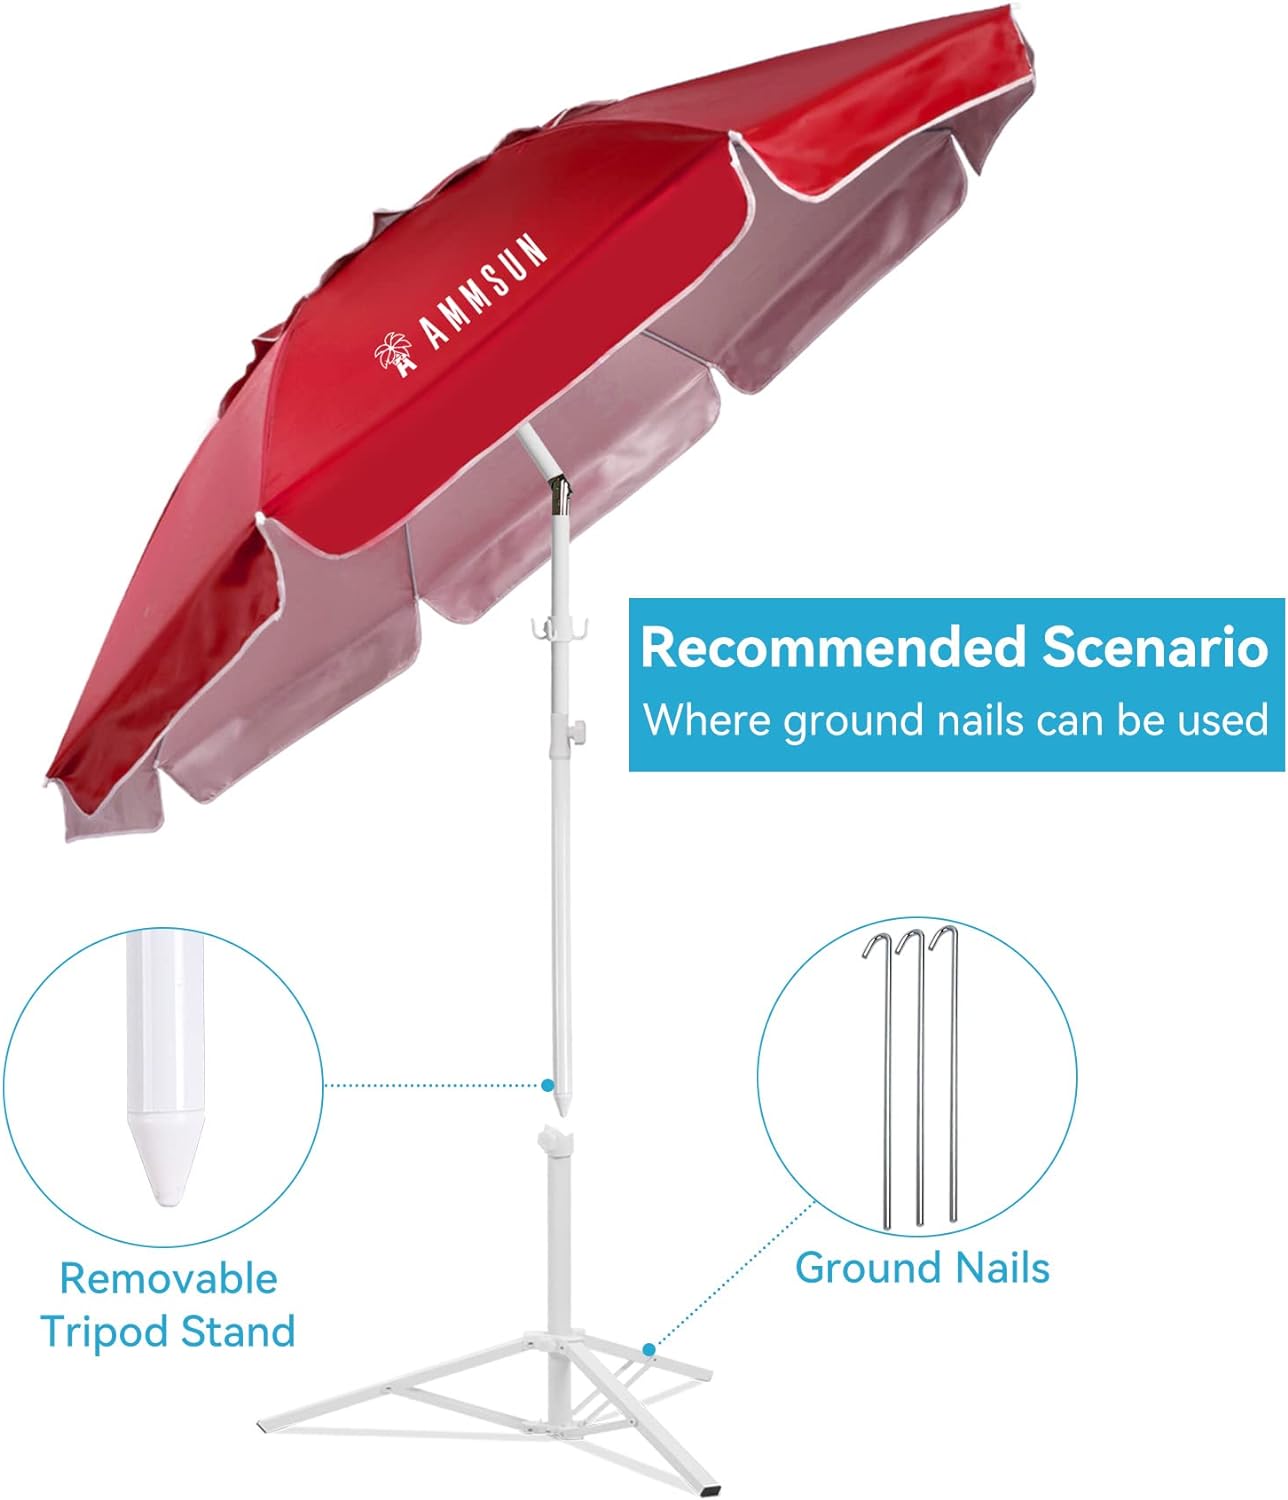 AMMSUN 6.5ft Lightweight Portable Sports Umbrella with Stand Red